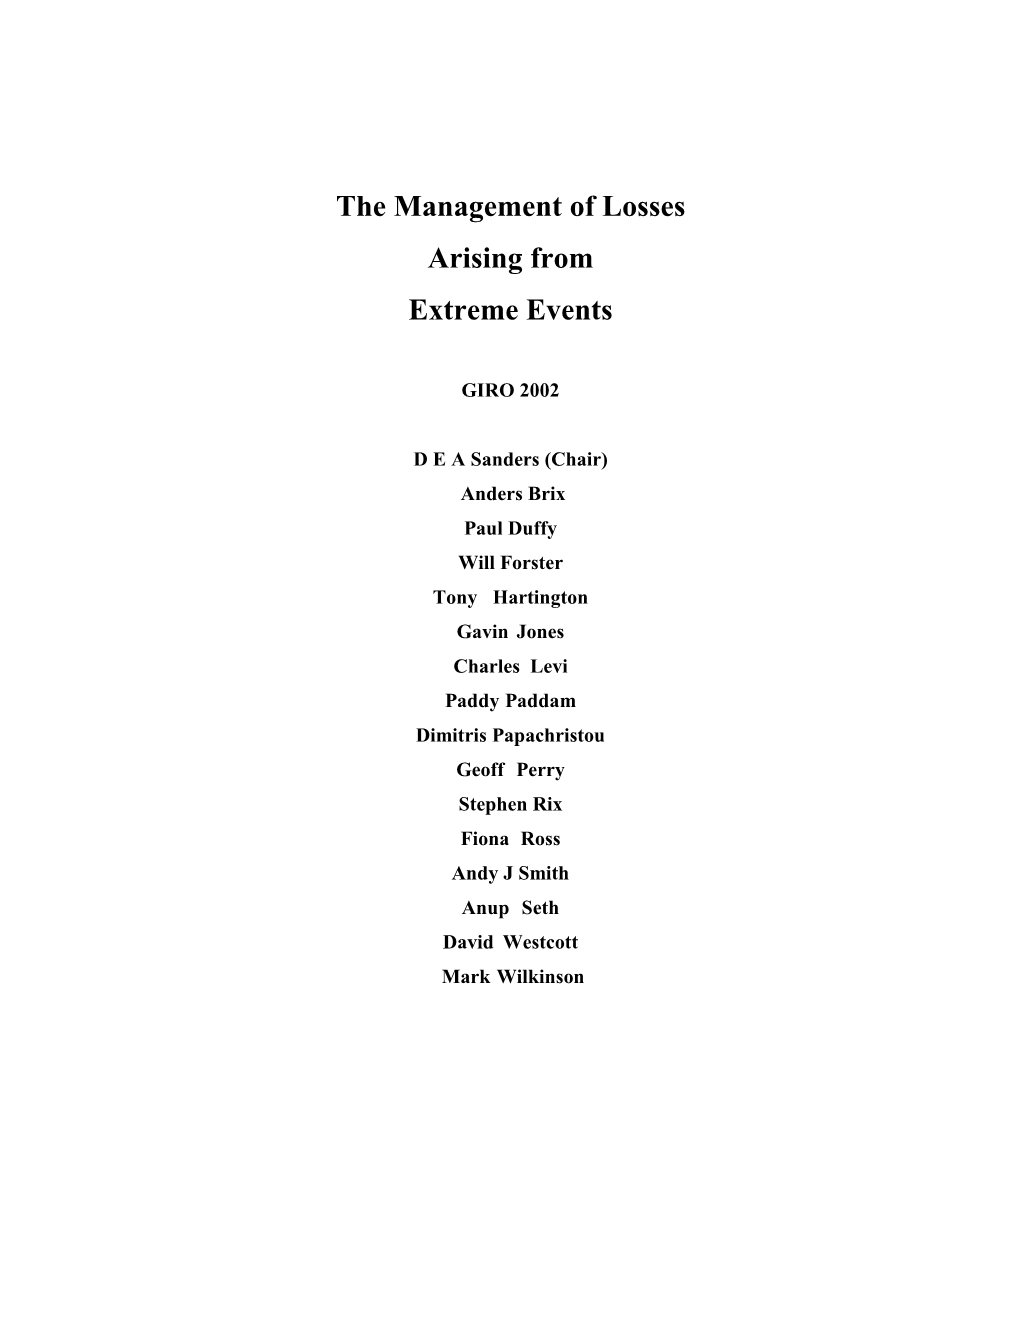 The Management of Losses Arising from Extreme Events